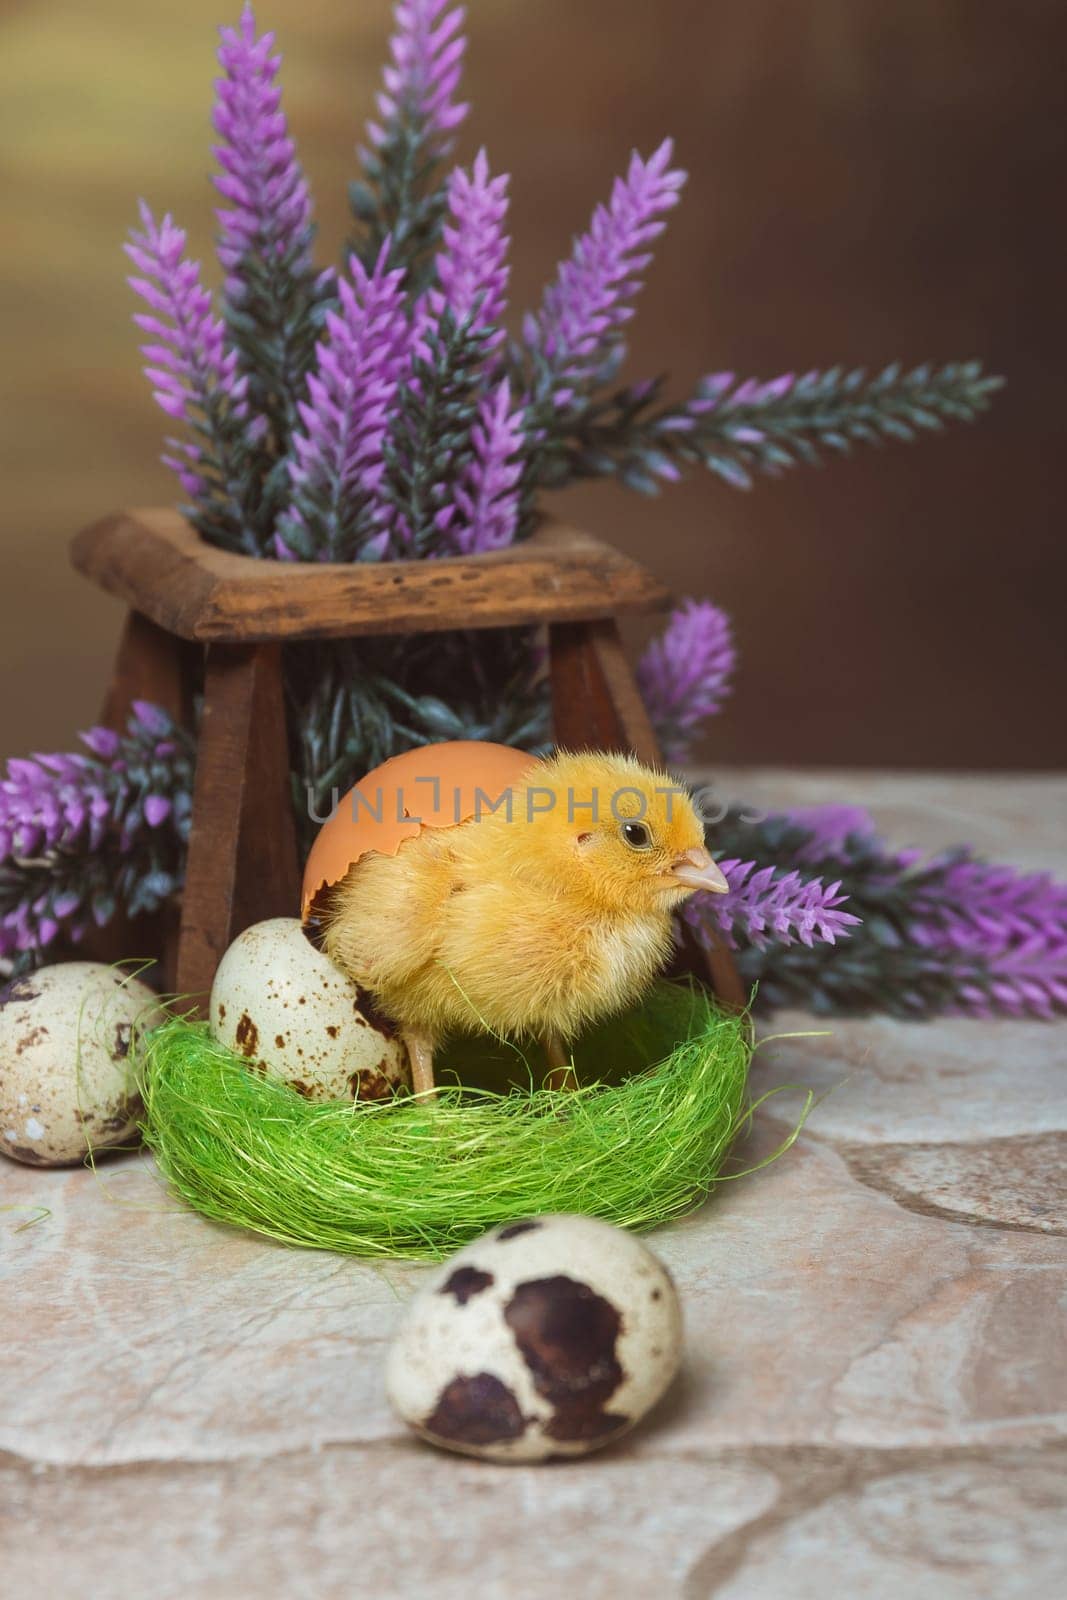 A small yellow quail chicken stands in a nest covered with a shell